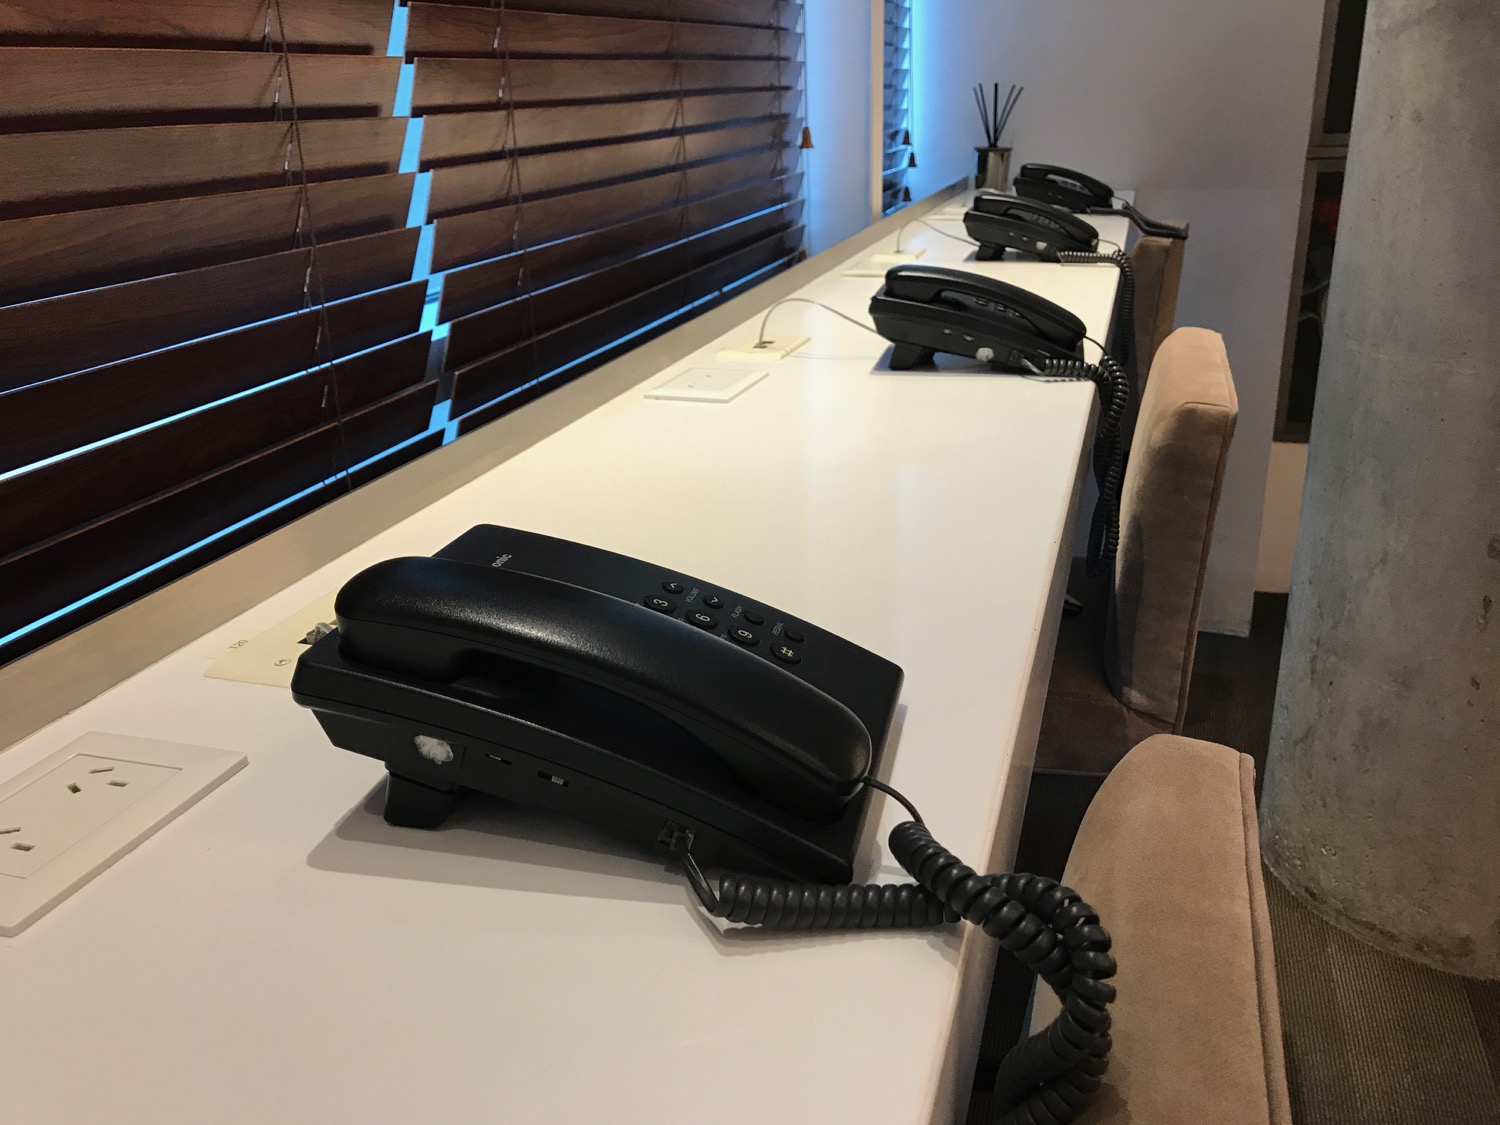 a row of telephones on a counter